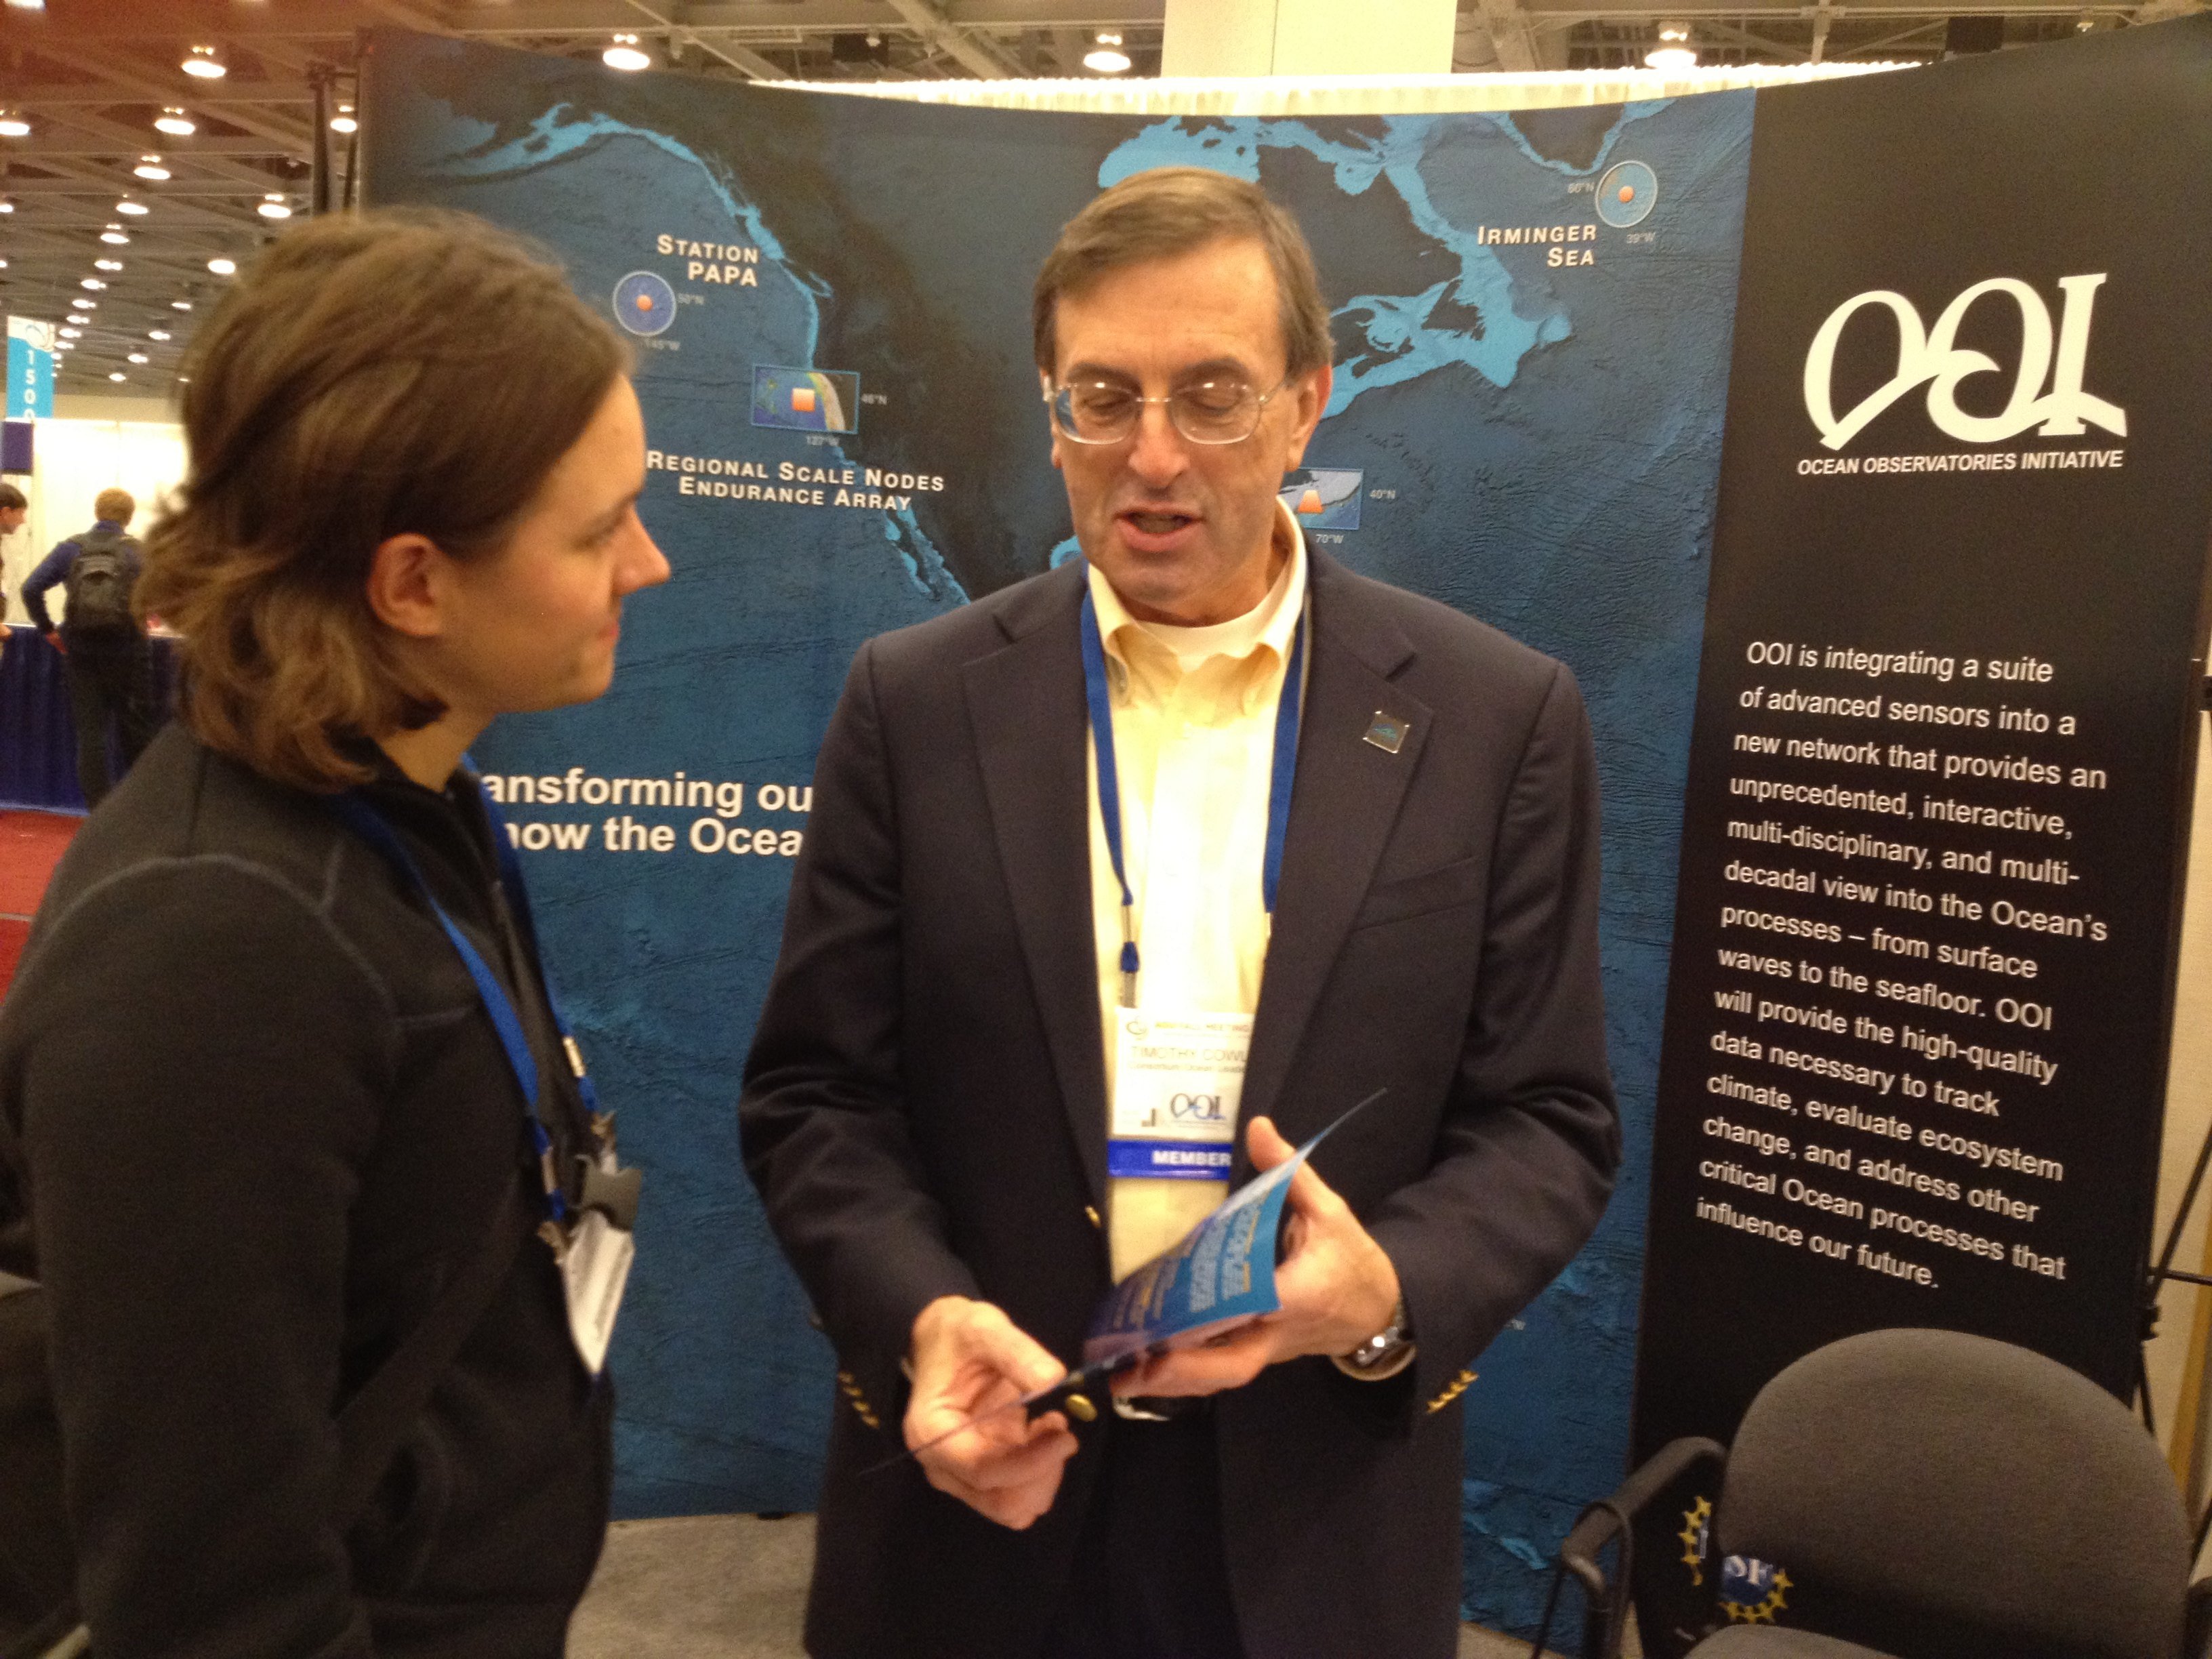 Tim Cowles, Vice President and Director of Ocean Observing, discusses the Ocean Observatories Initiative with Dr. Natalie Griffiths, Postdoctoral Research Associate, Oak Ridge National Laboratory, at the OOI booth during the American Geophysical Union fall meeting in San Francisco, Calif., in December. (Credit: OOI Program Management Office Communications)